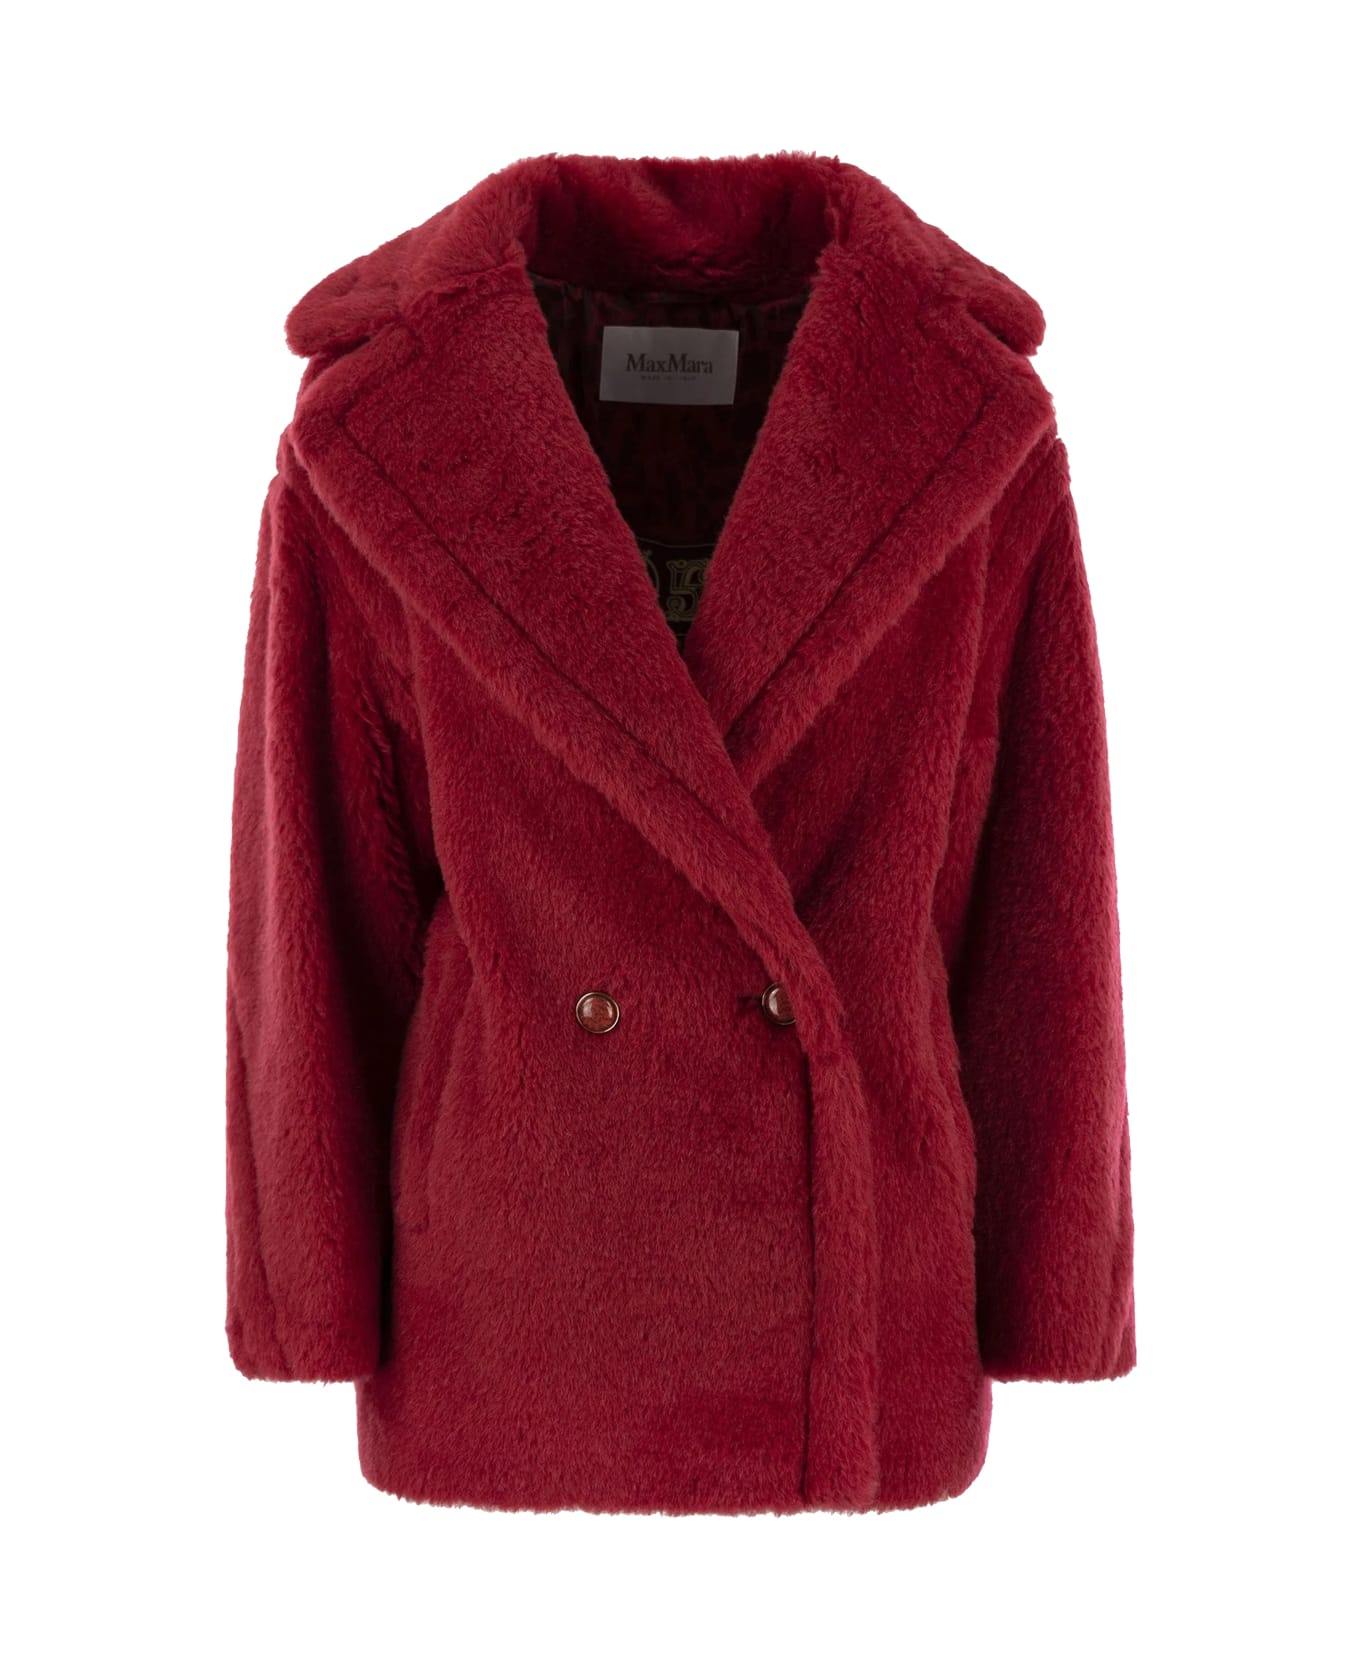 Max Mara Double-breasted Long-sleeved Coat - Red